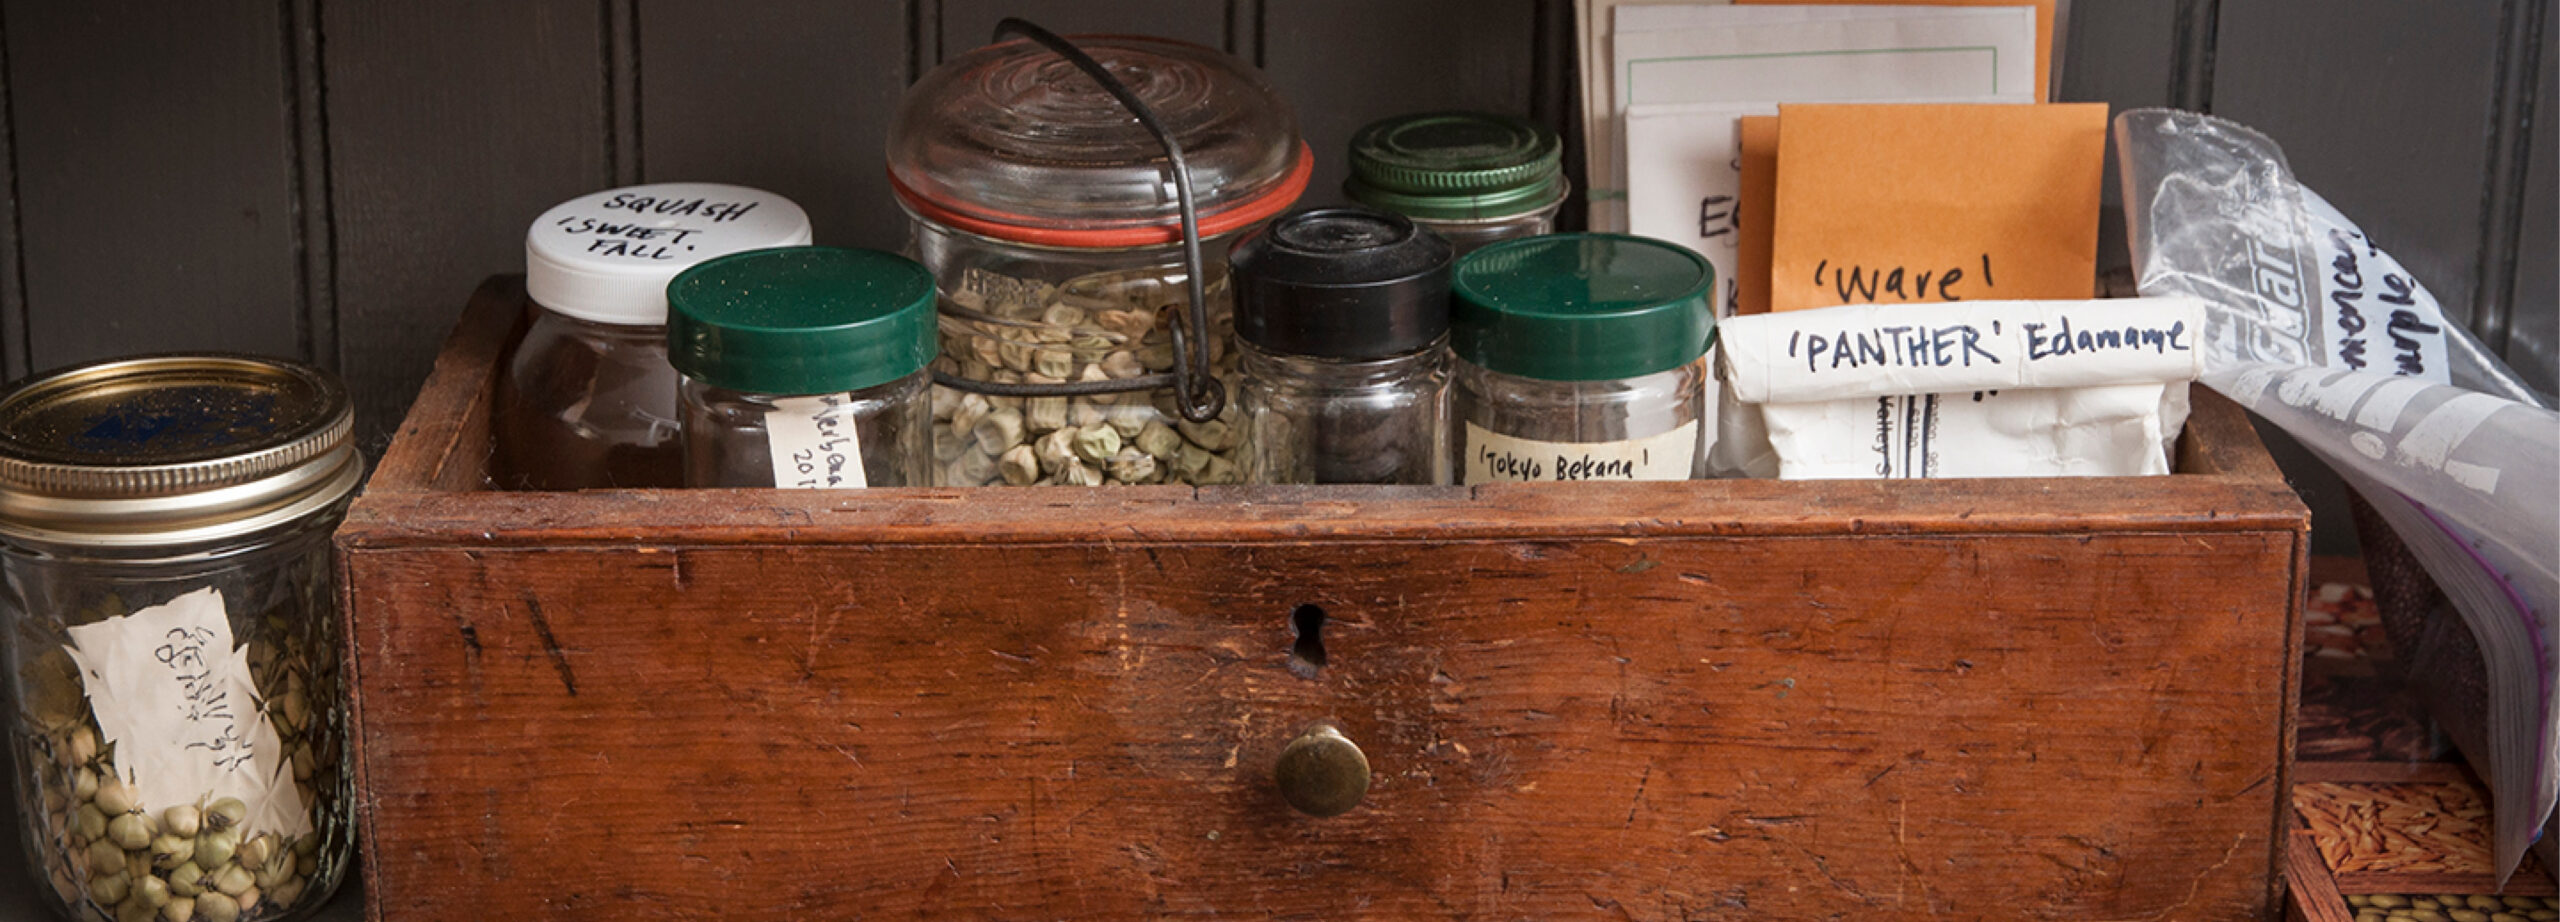 How one man made saving heirloom seeds his mission